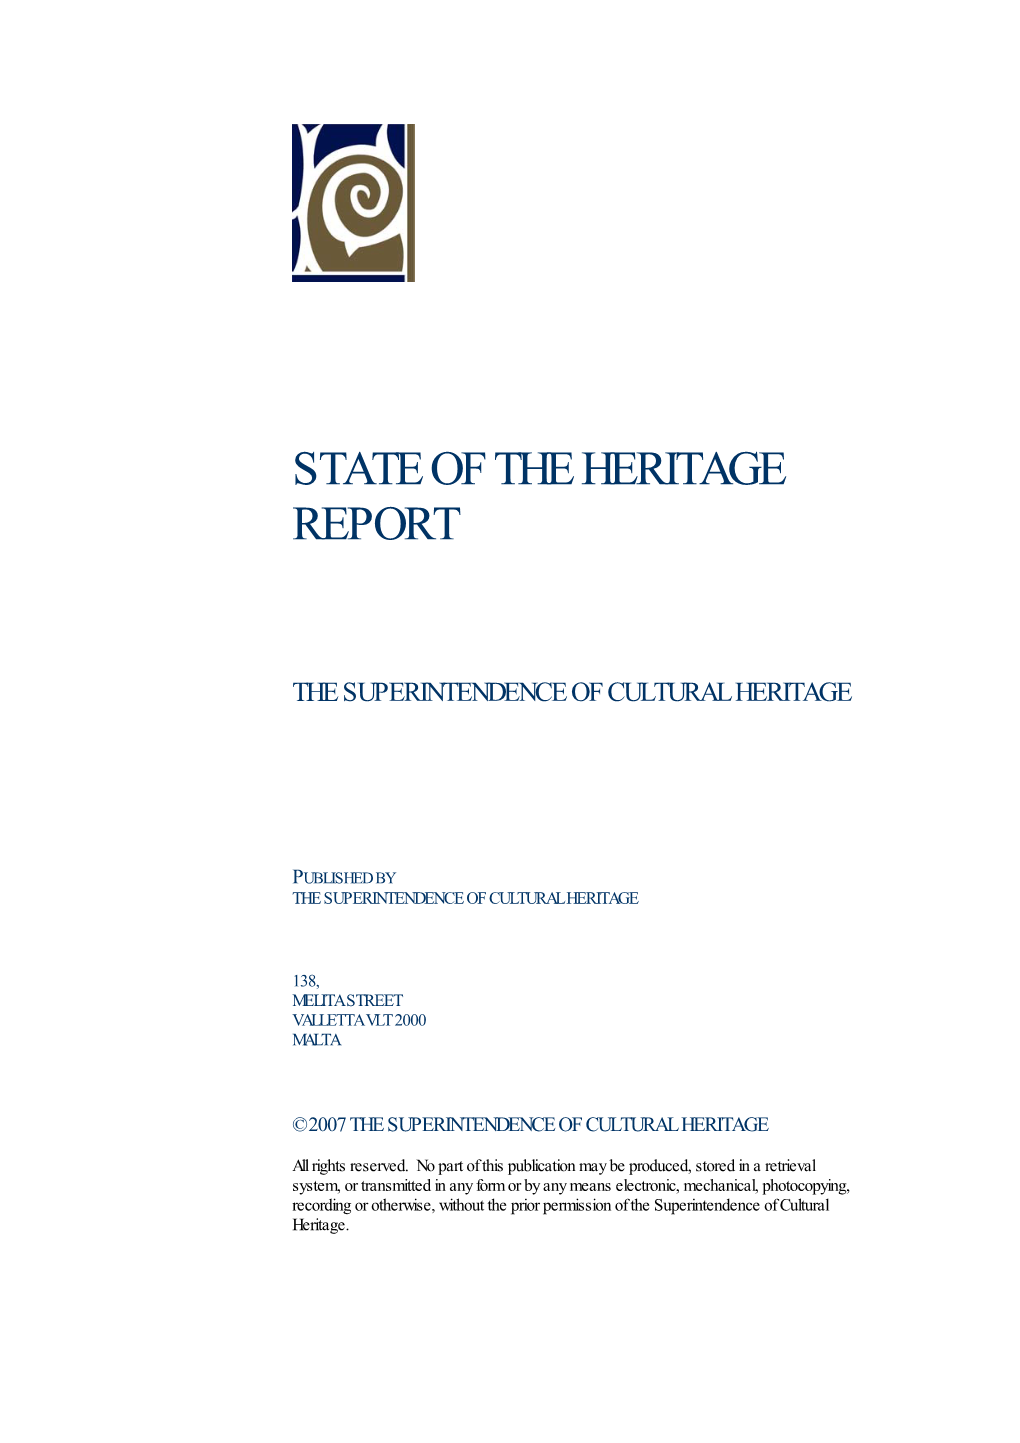 The State of the Heritage Report 2007